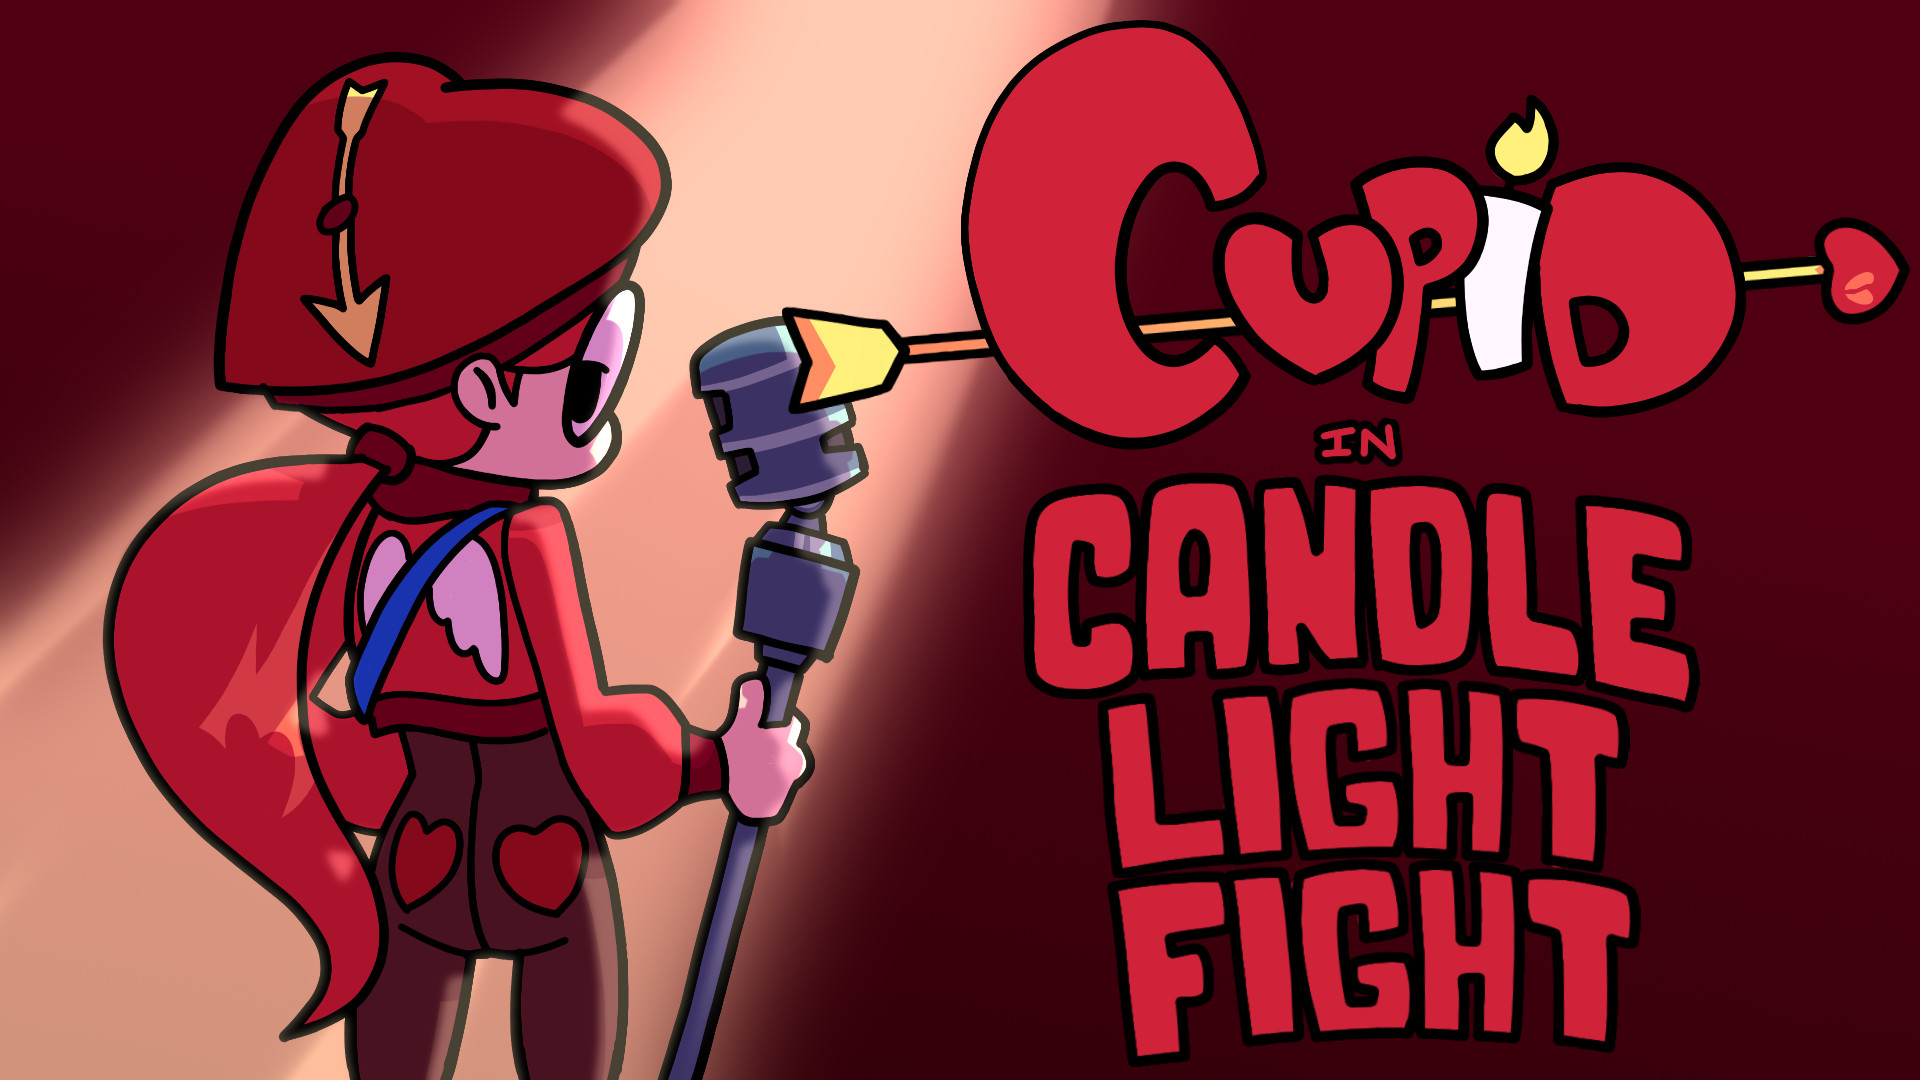 Candlelight Fight